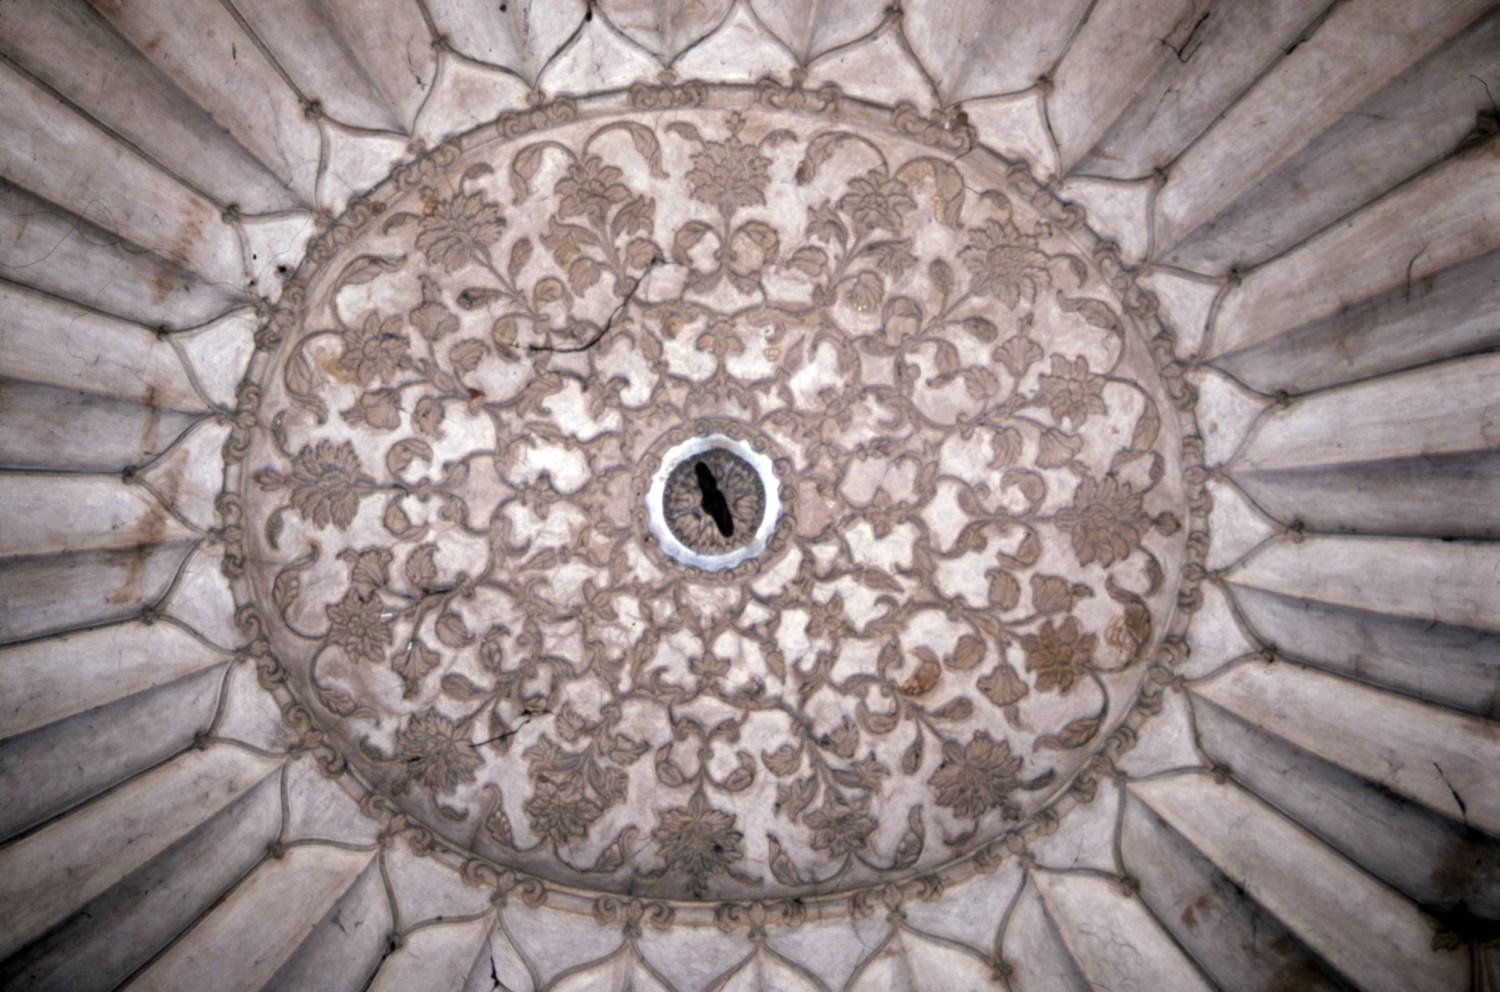 South arch of tomb, detail of rosette